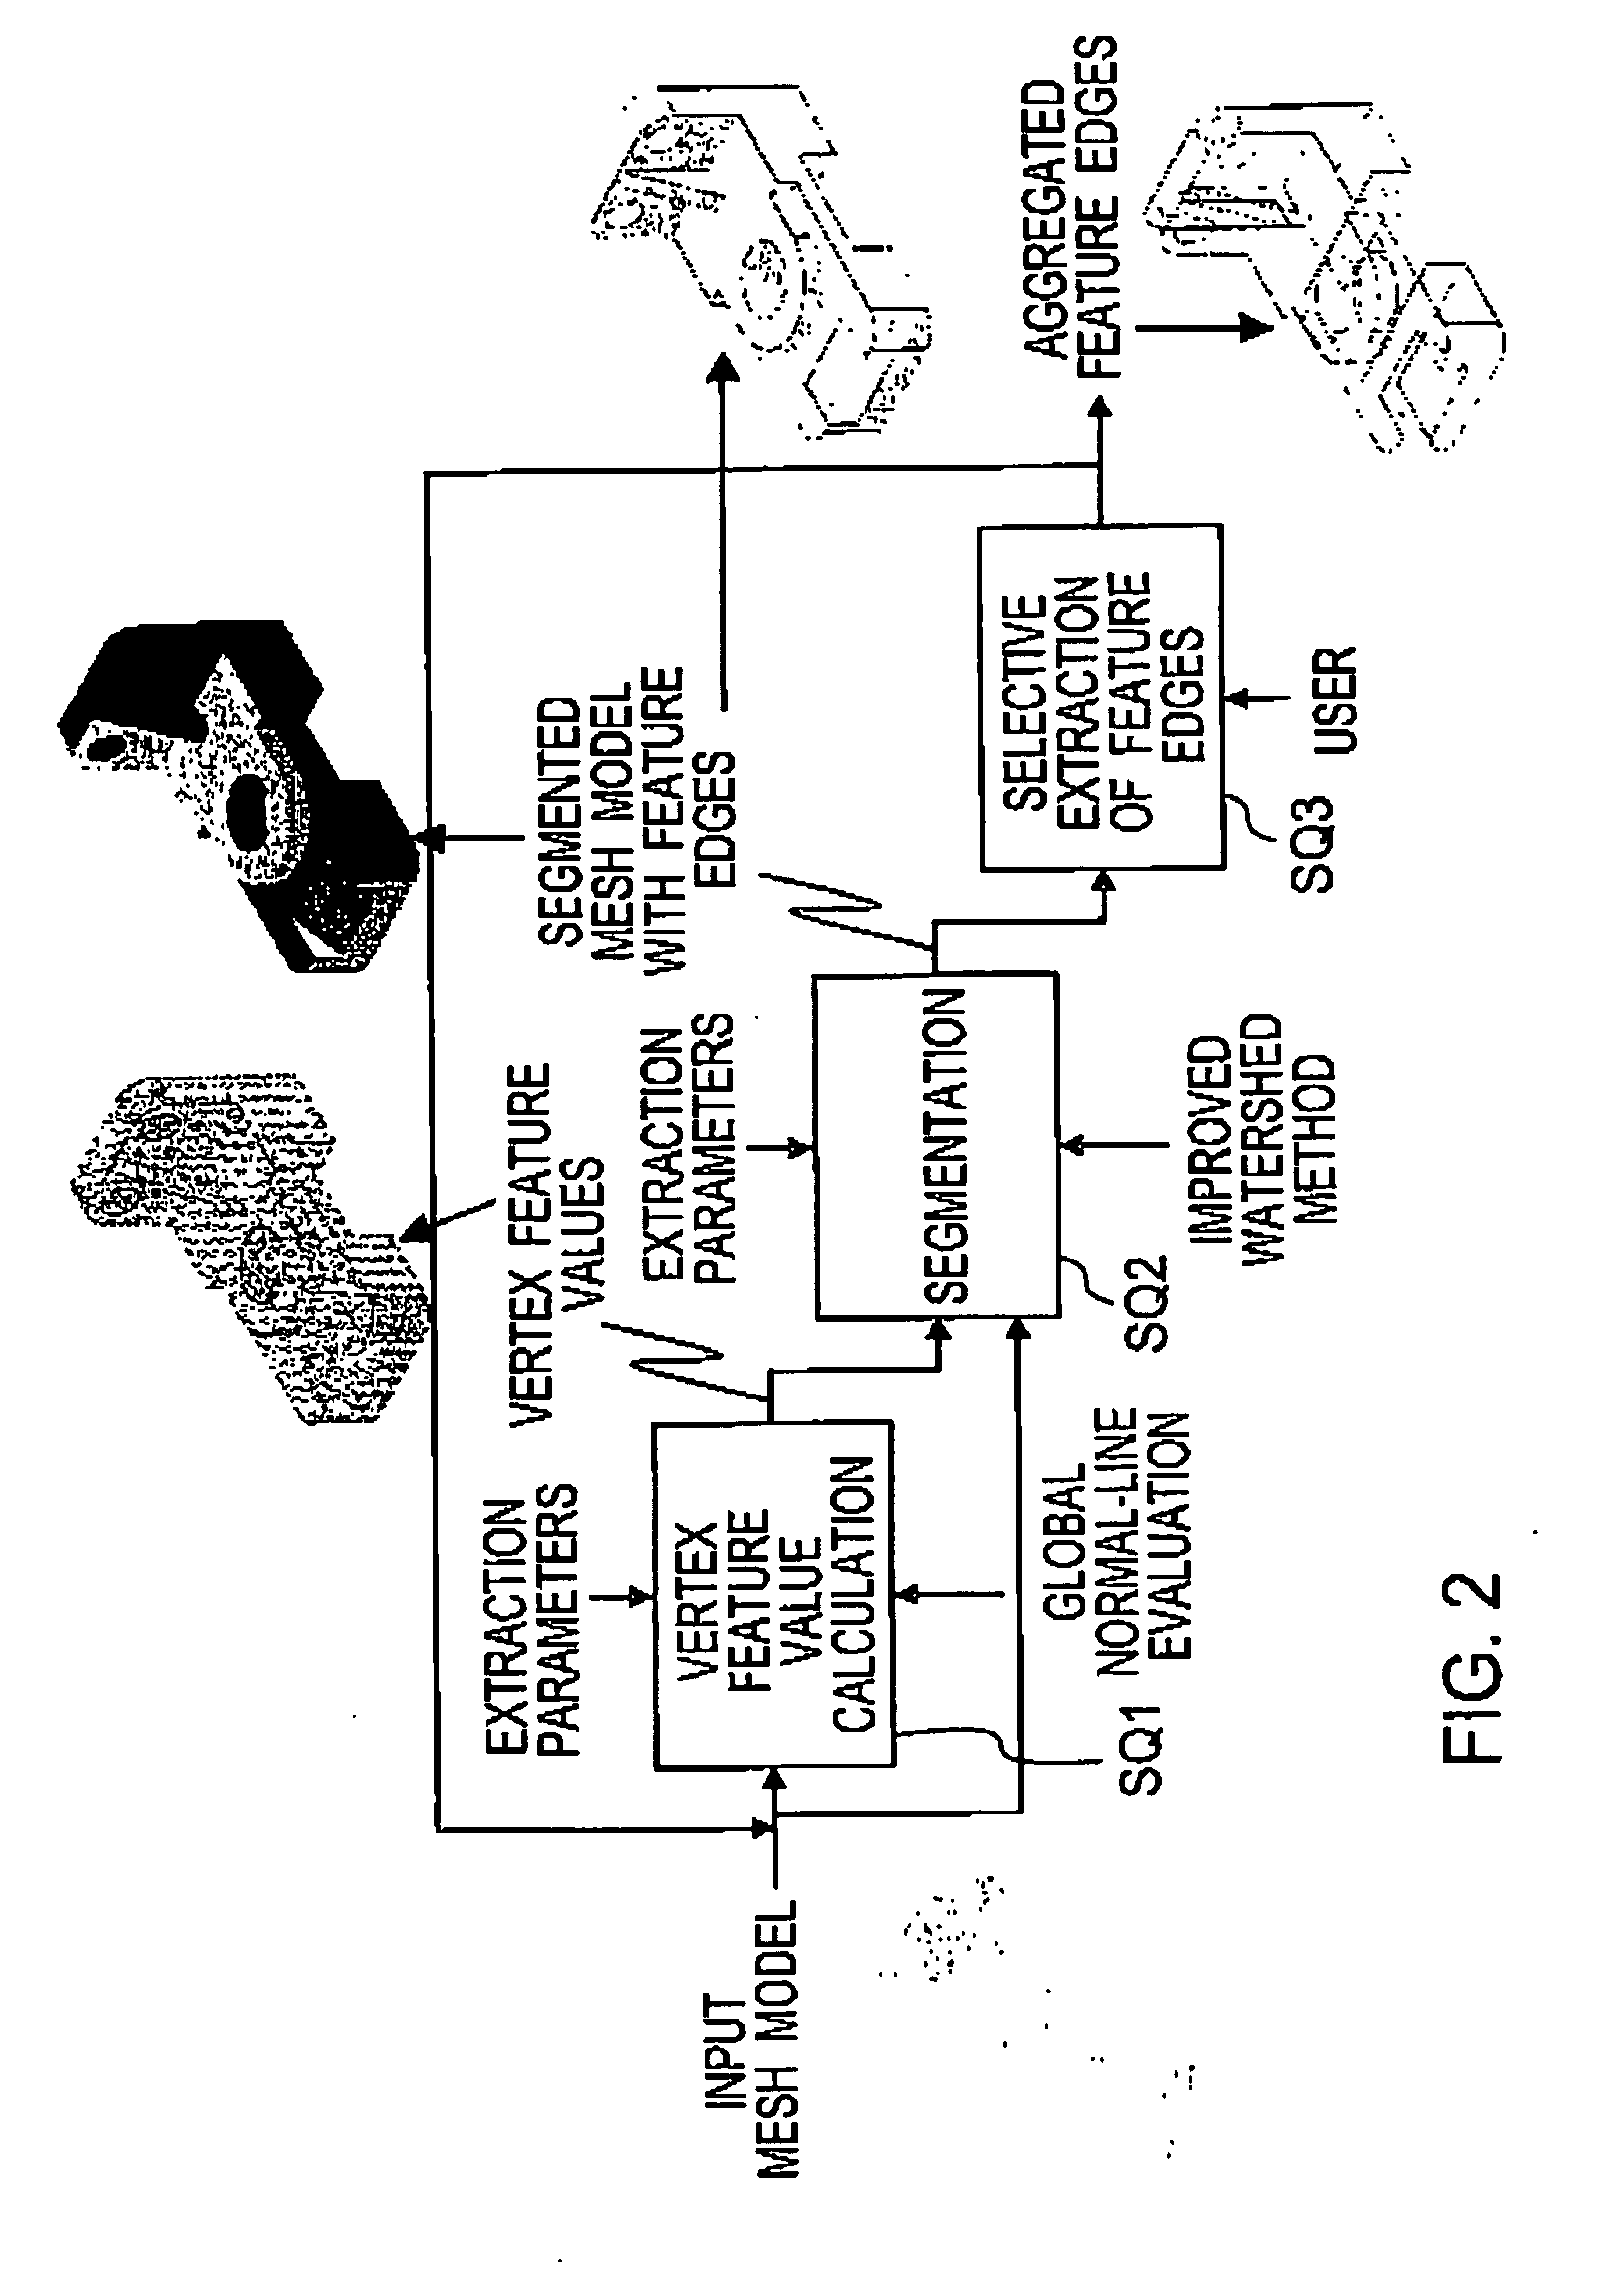 Apparatus and a method of feature edge extraction from a triangular mesh model